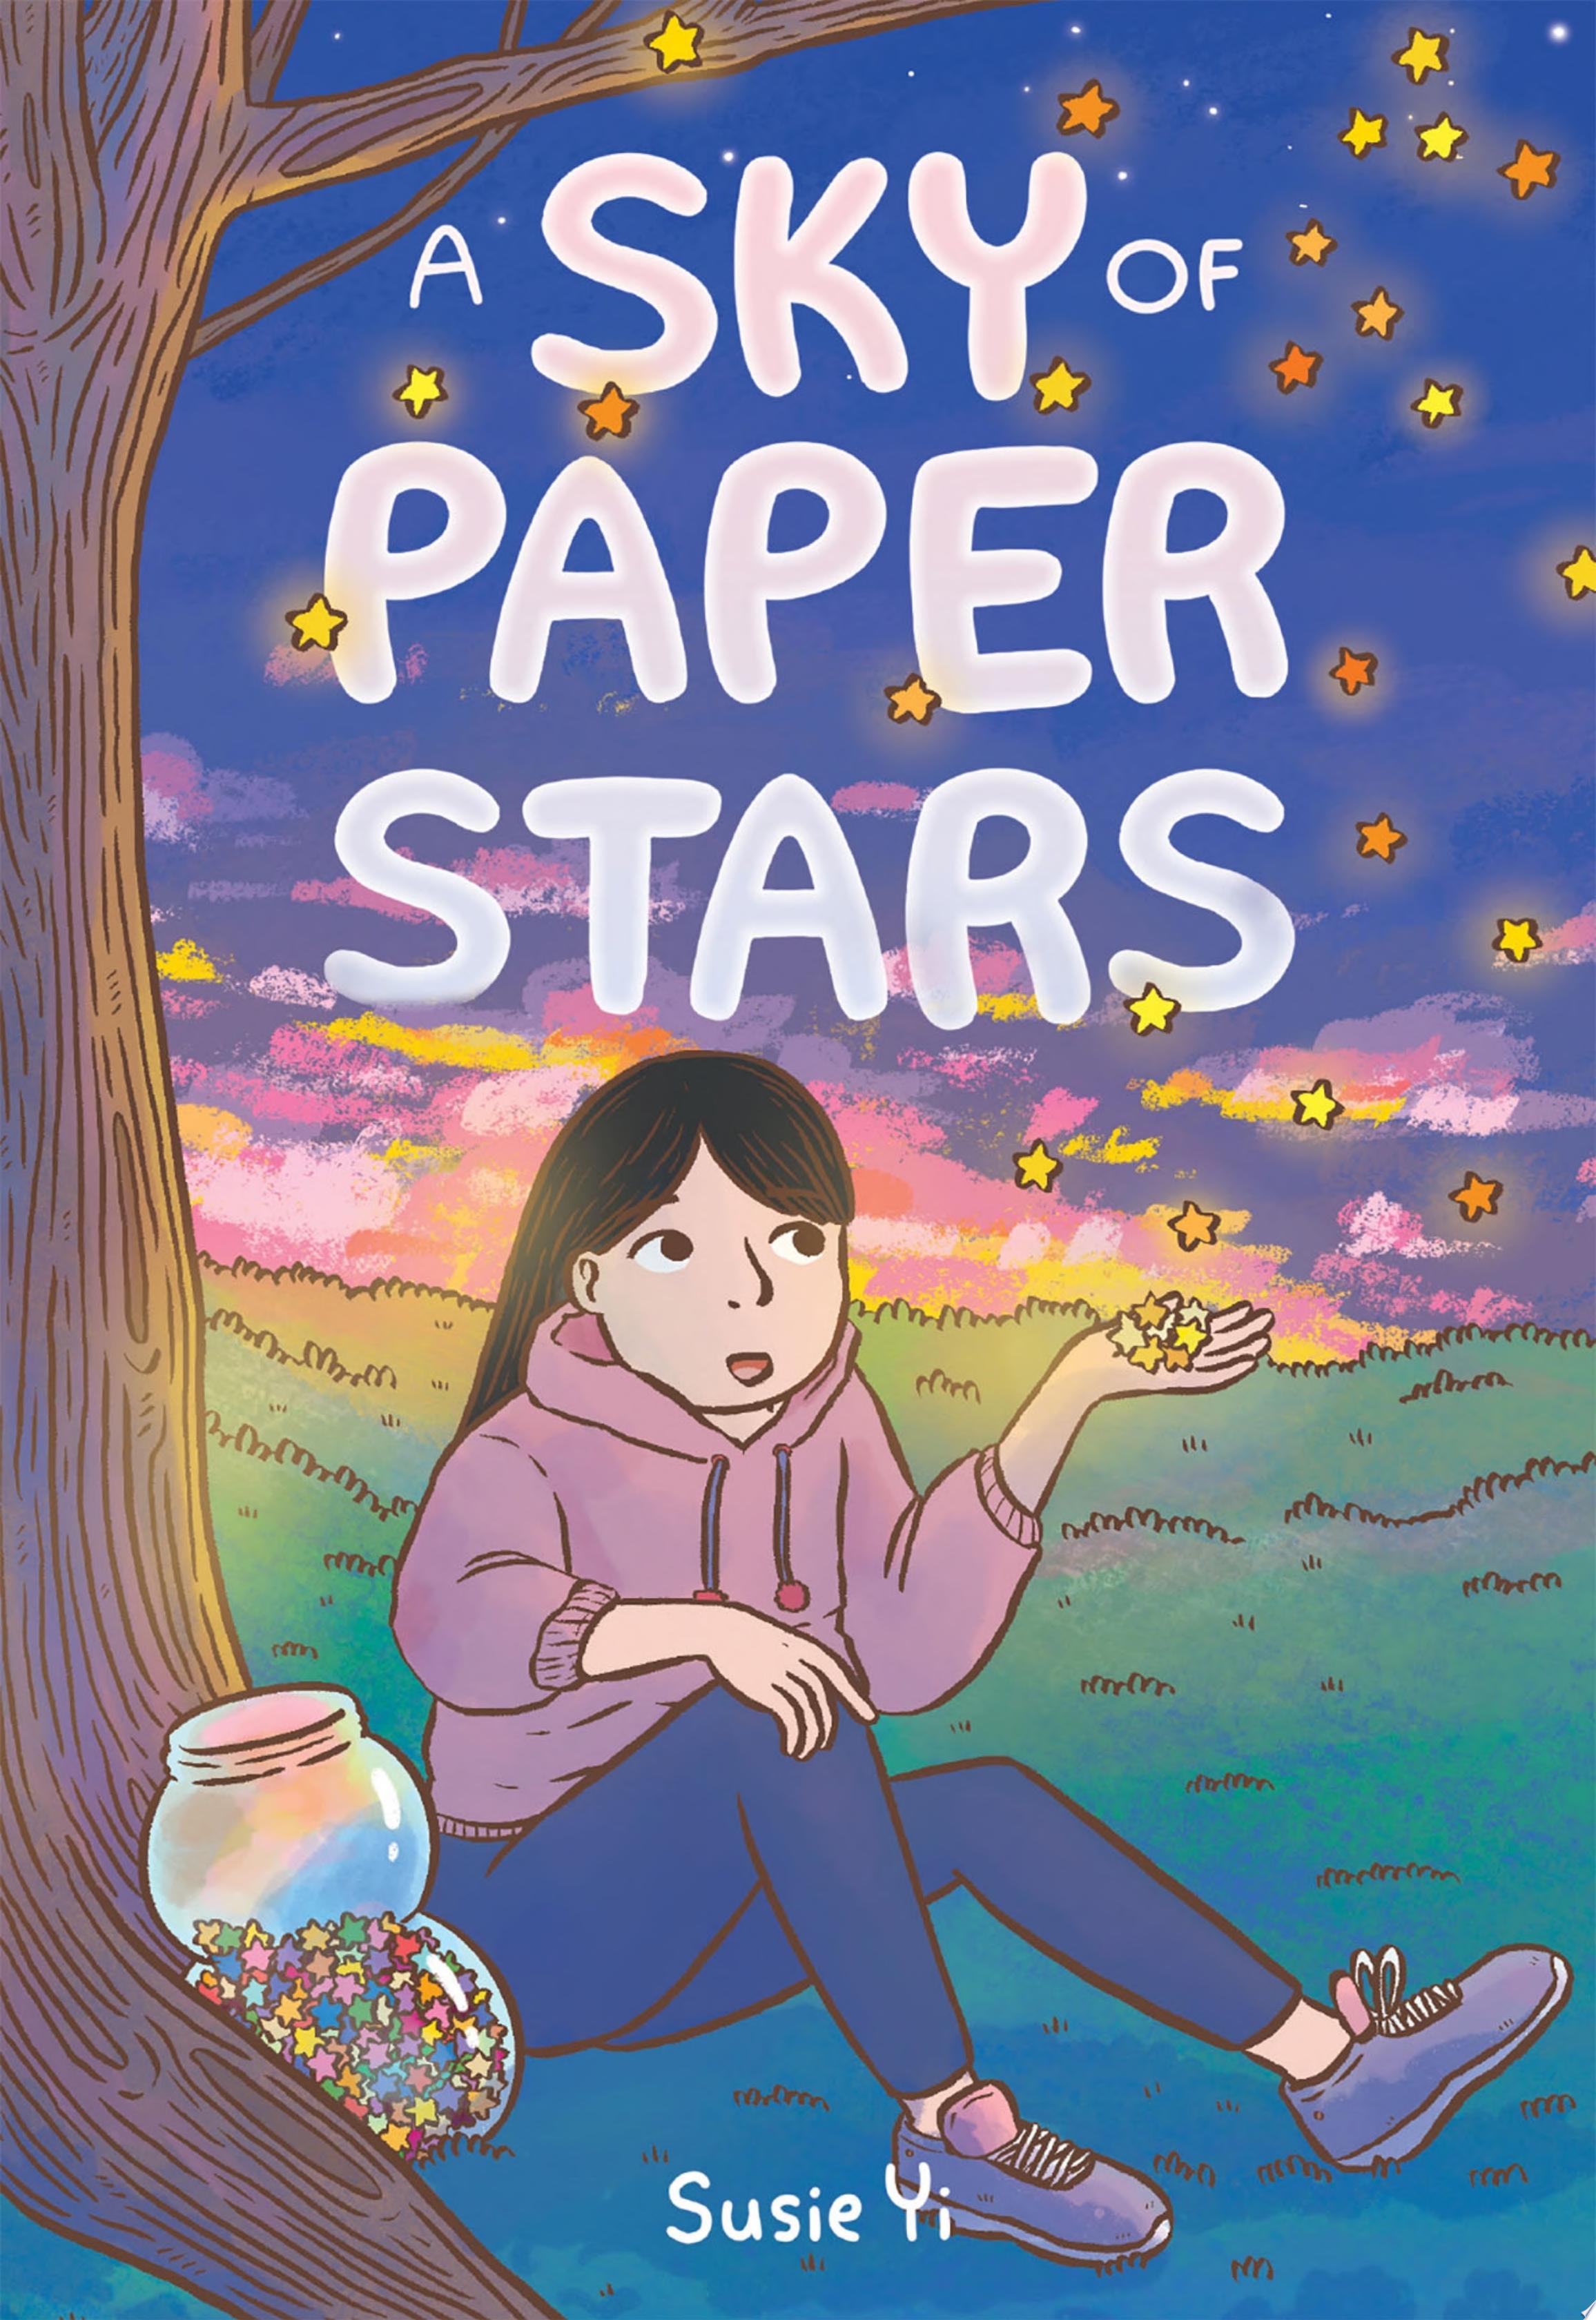 Image for "A Sky of Paper Stars"